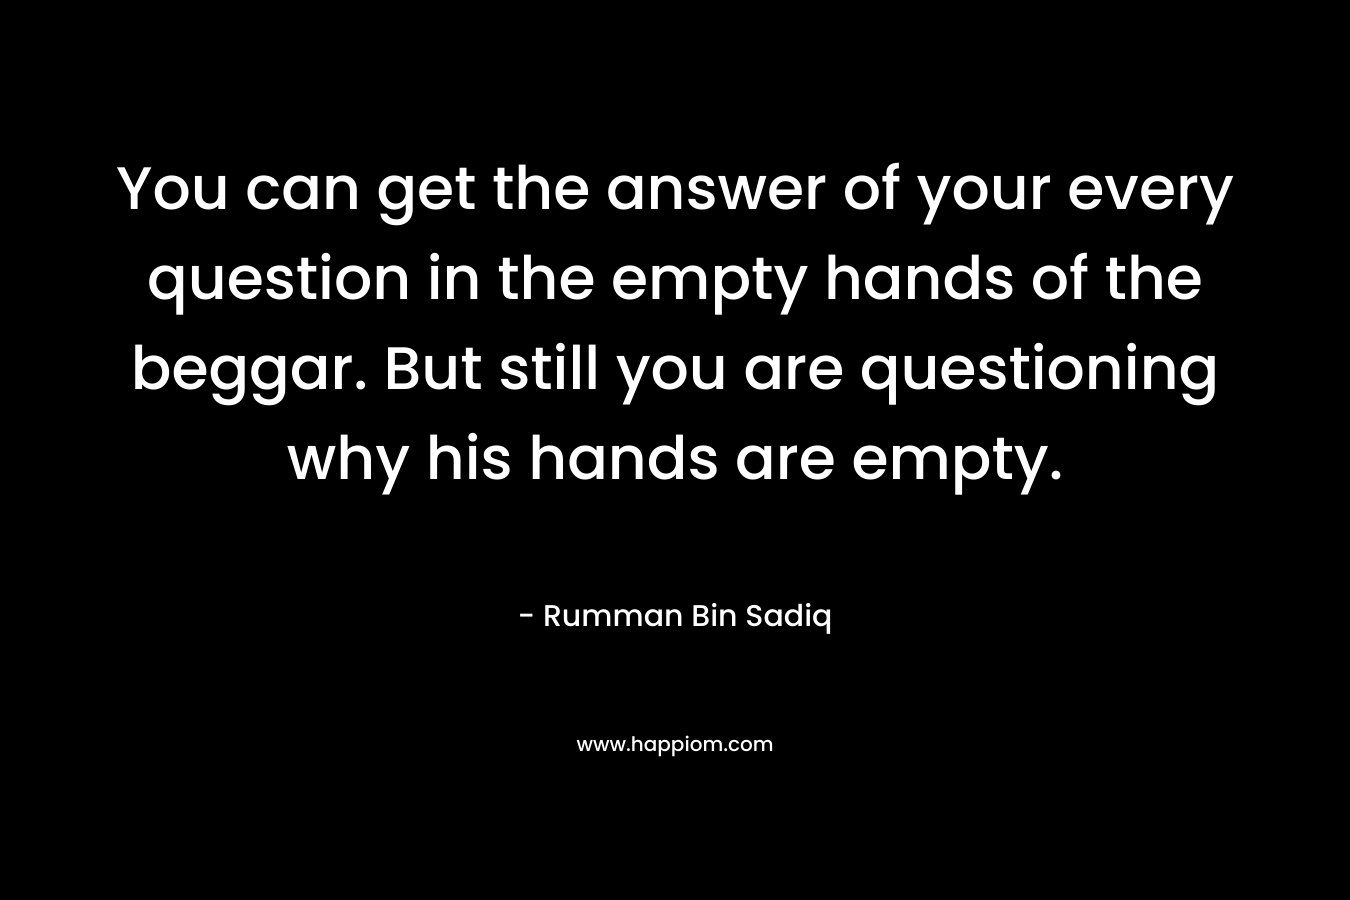 You can get the answer of your every question in the empty hands of the beggar. But still you are questioning why his hands are empty.